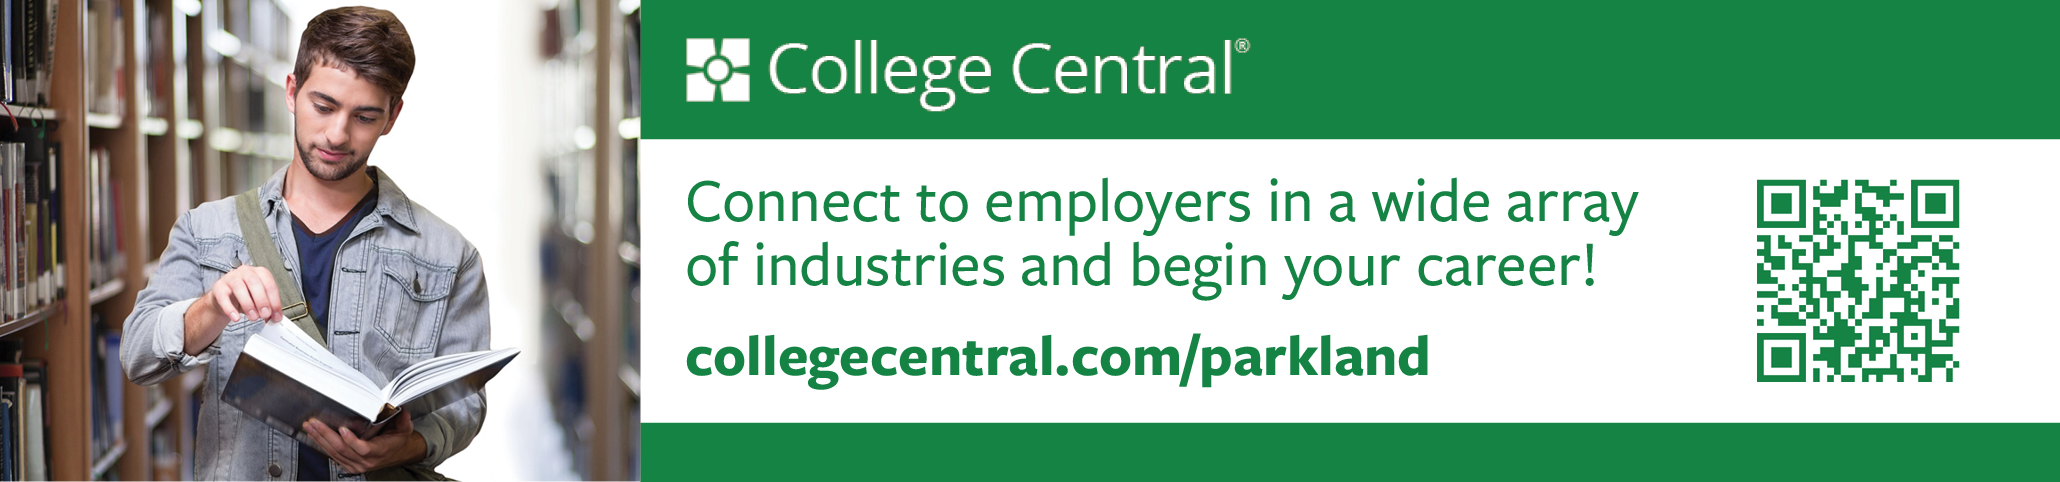 College Central: Connect to employers in a wide array of industries and begin your career!